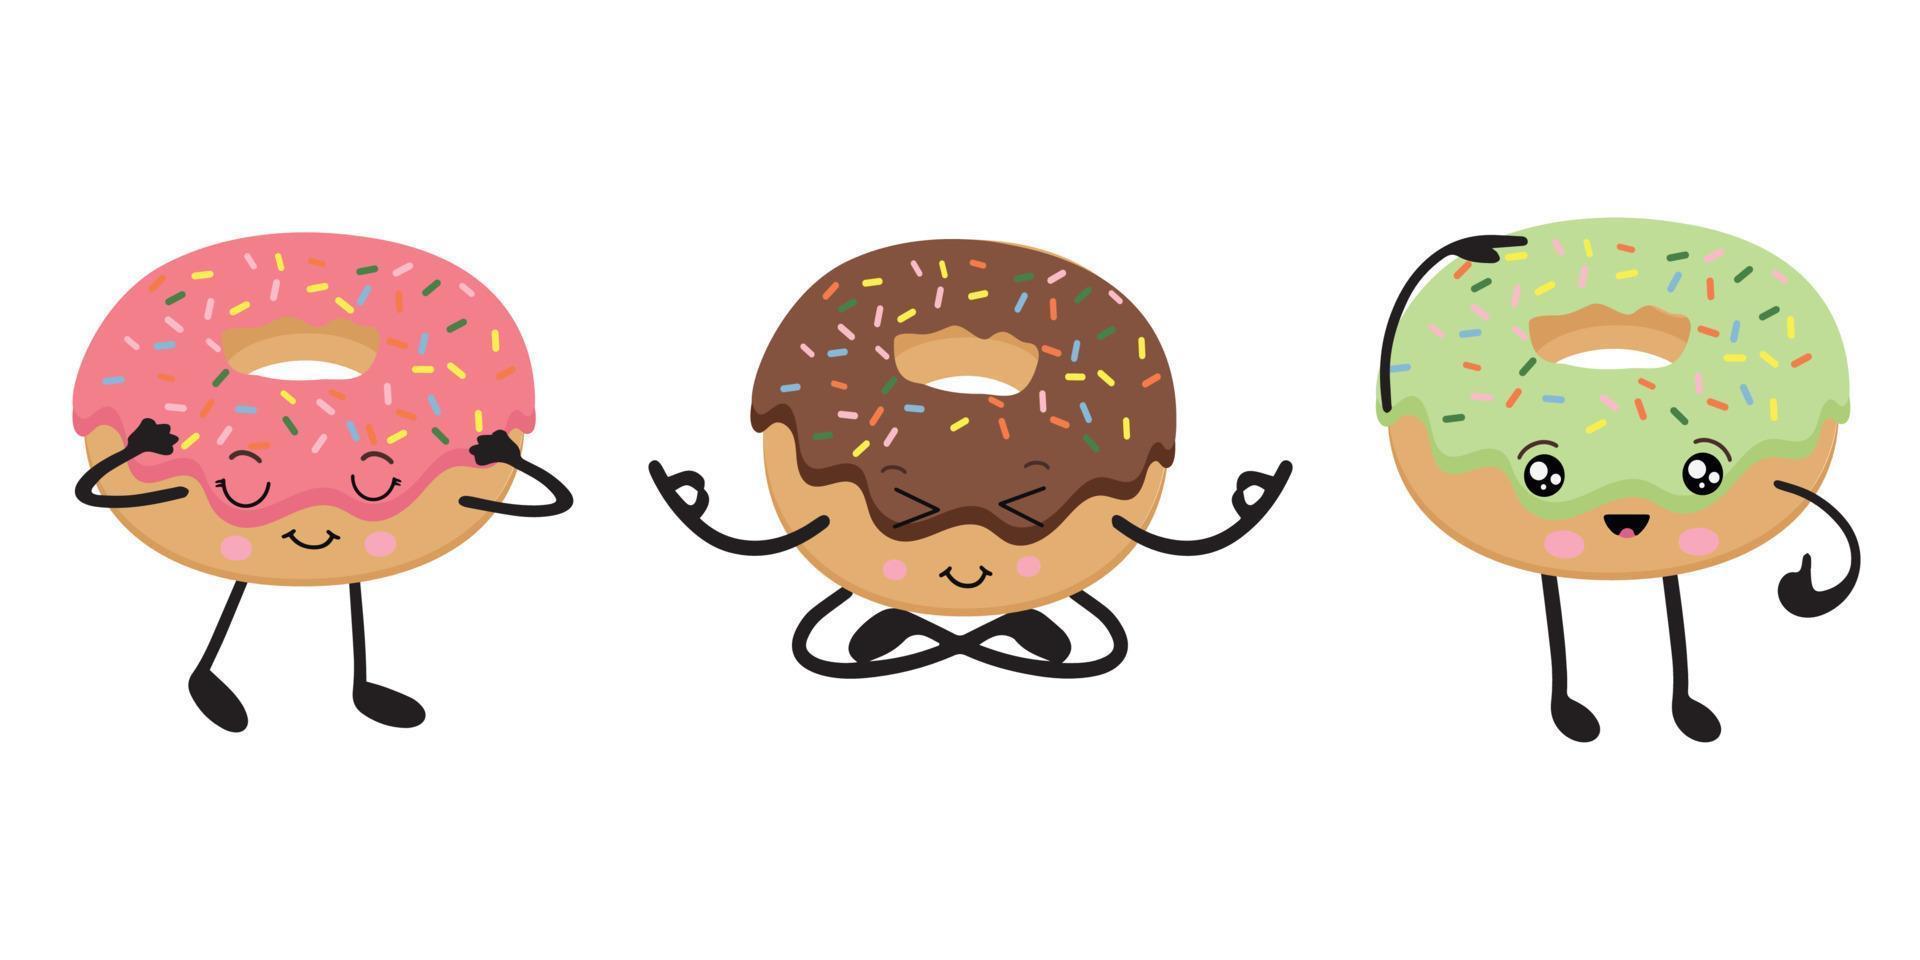 A set of bright donuts with cute emoticons. Vector illustration of desserts. Collection of sweet pastries.